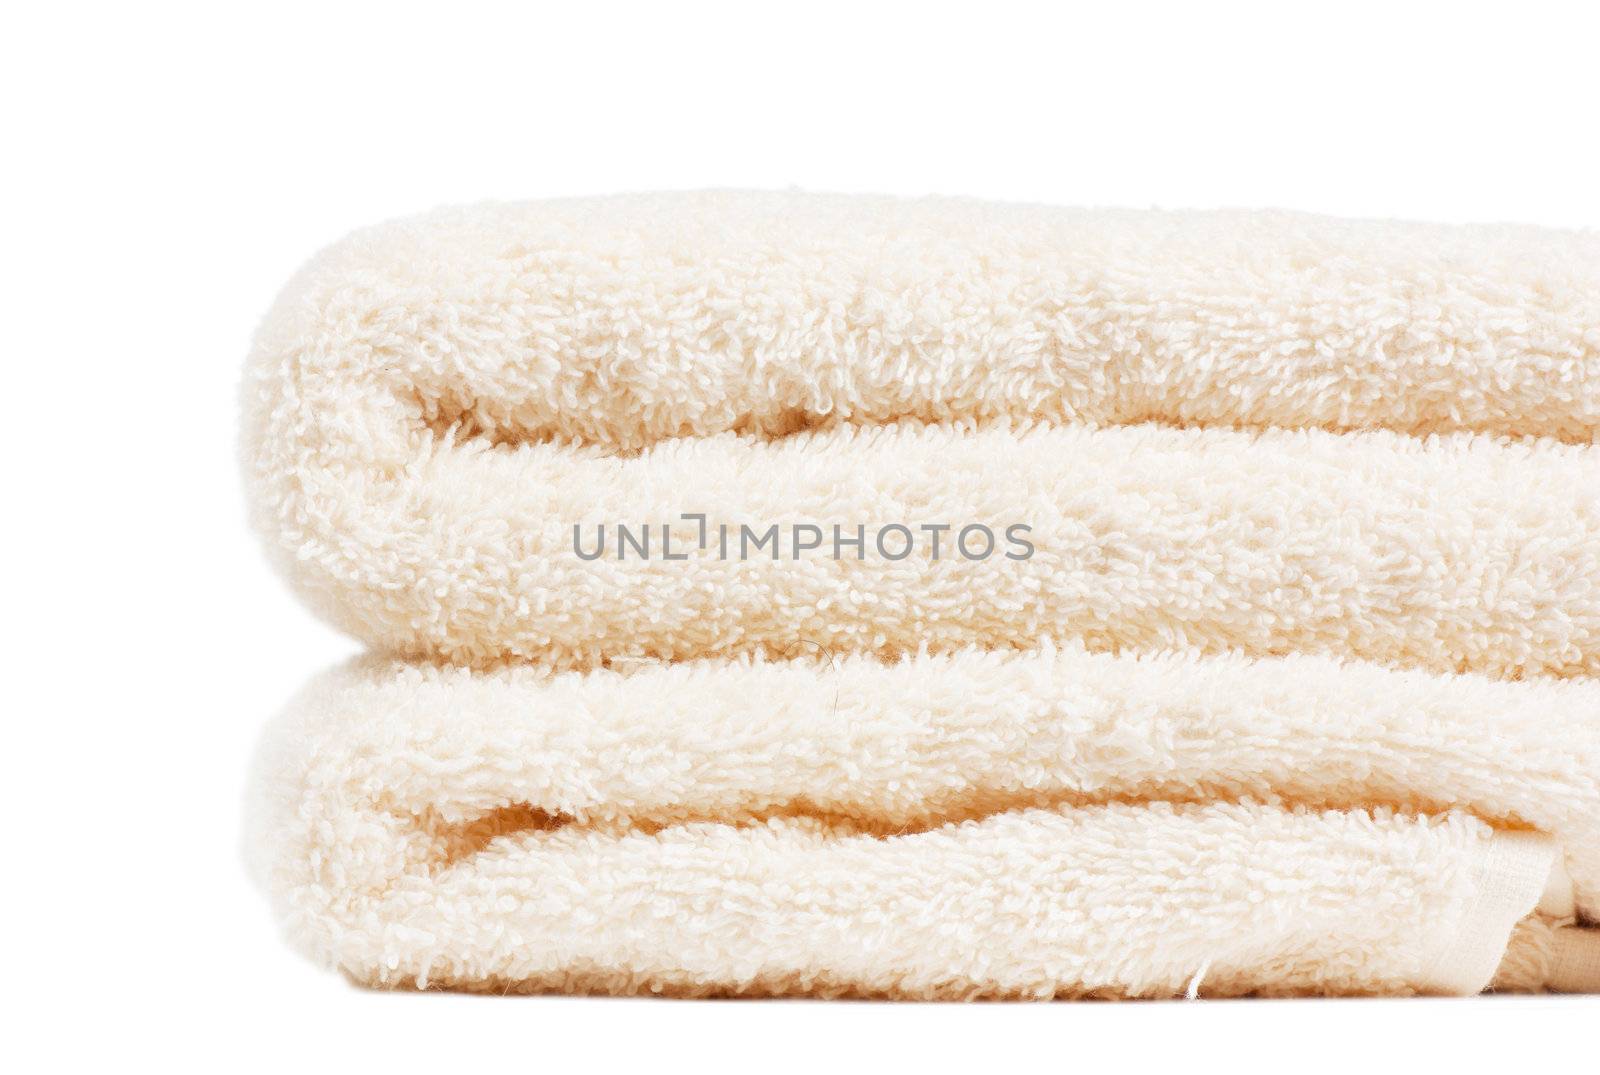 Stack of white towels over white background